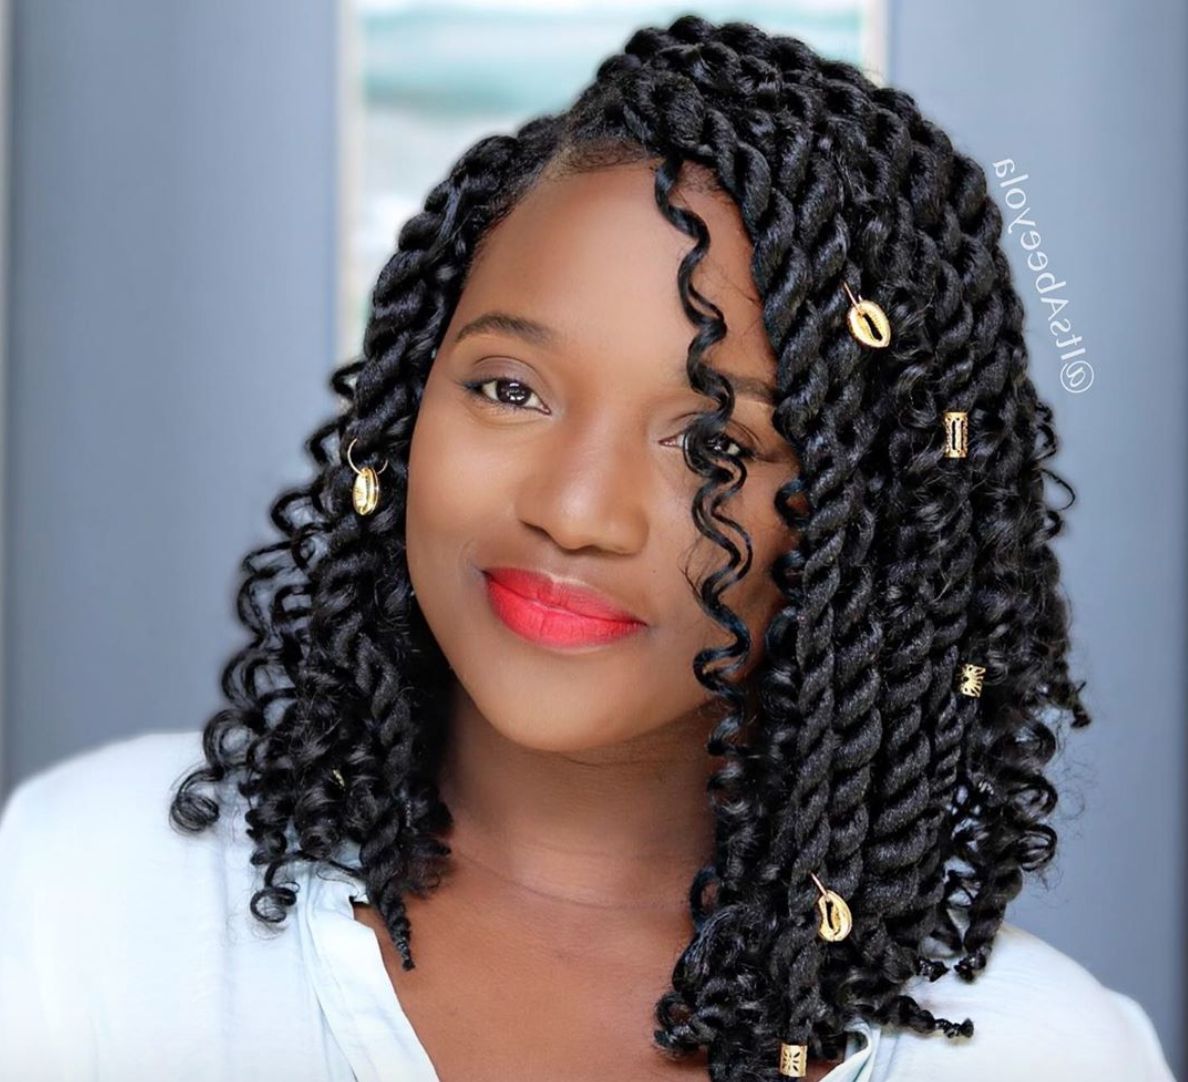 21 Bob Braid Hairstyles You'll Obsess Over For 2020 | Glamour Inside Braided Bob Short Hairstyles (View 19 of 25)